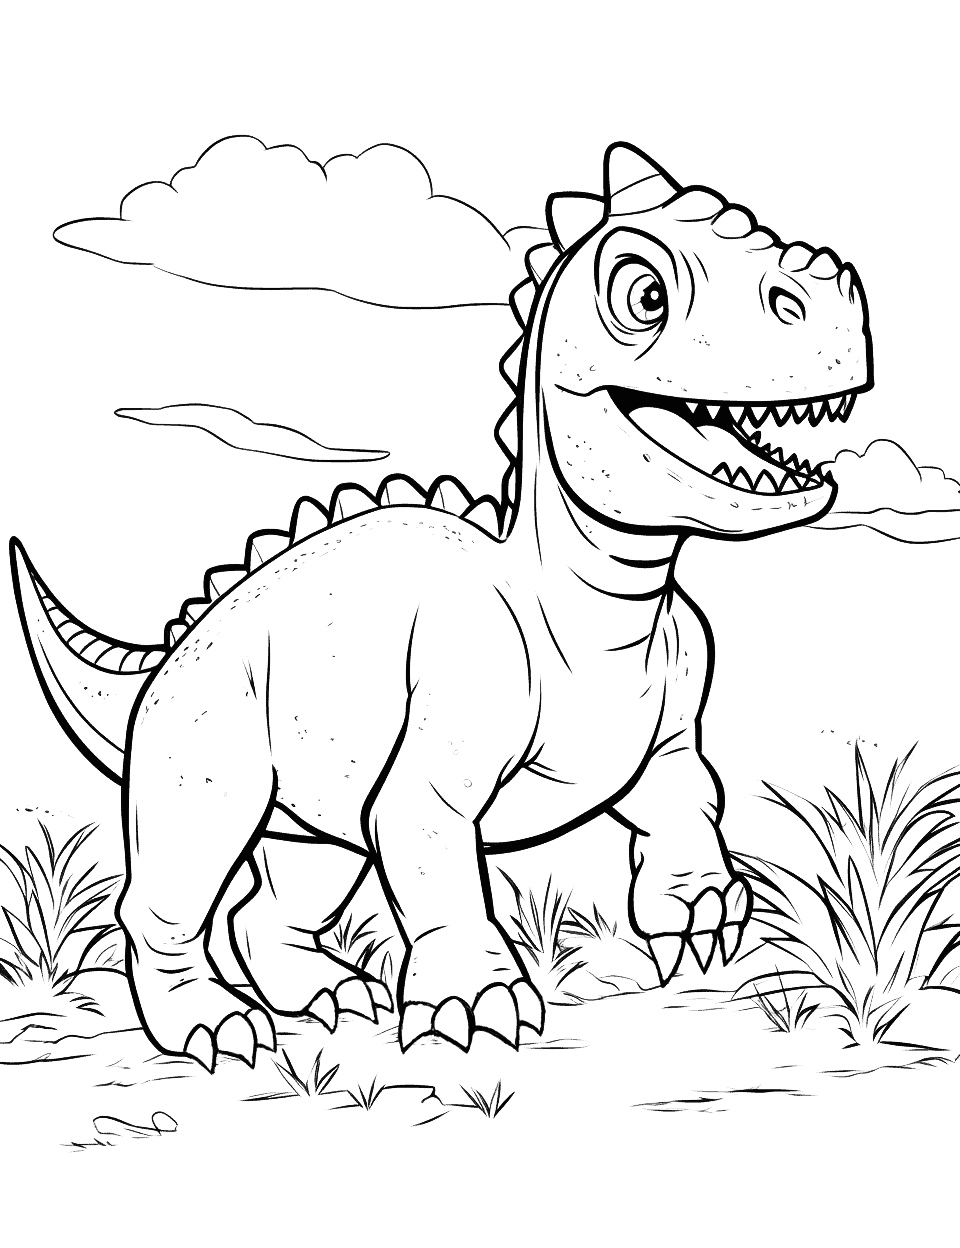 Carnotaurus on the Hunt Coloring Page - A Carnotaurus on the hunt, ready to pounce on its next meal.